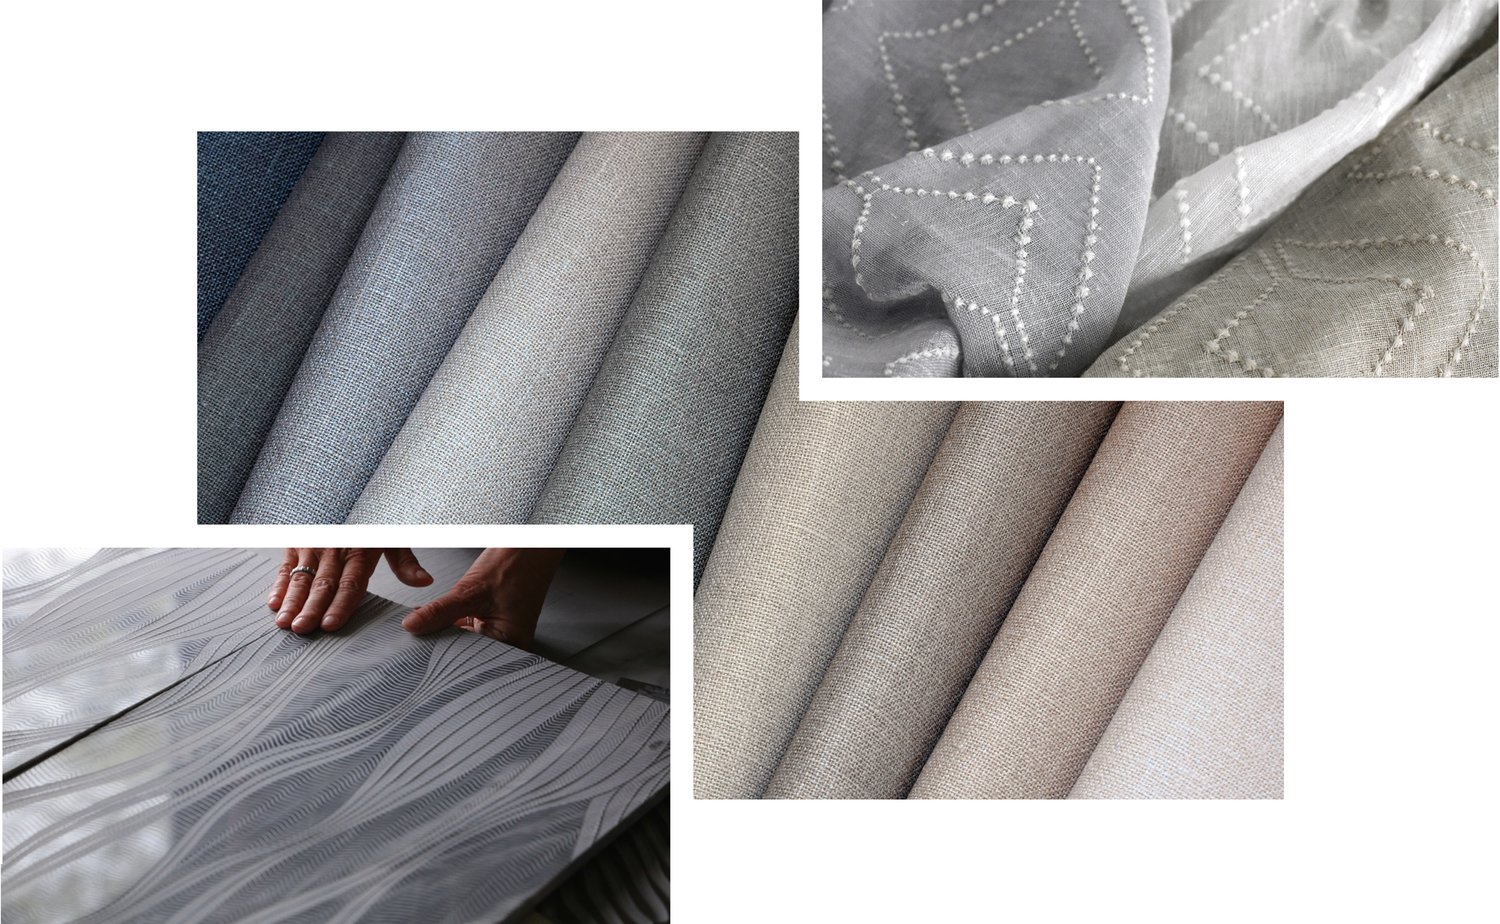 Four images showing a variety of fabrics.